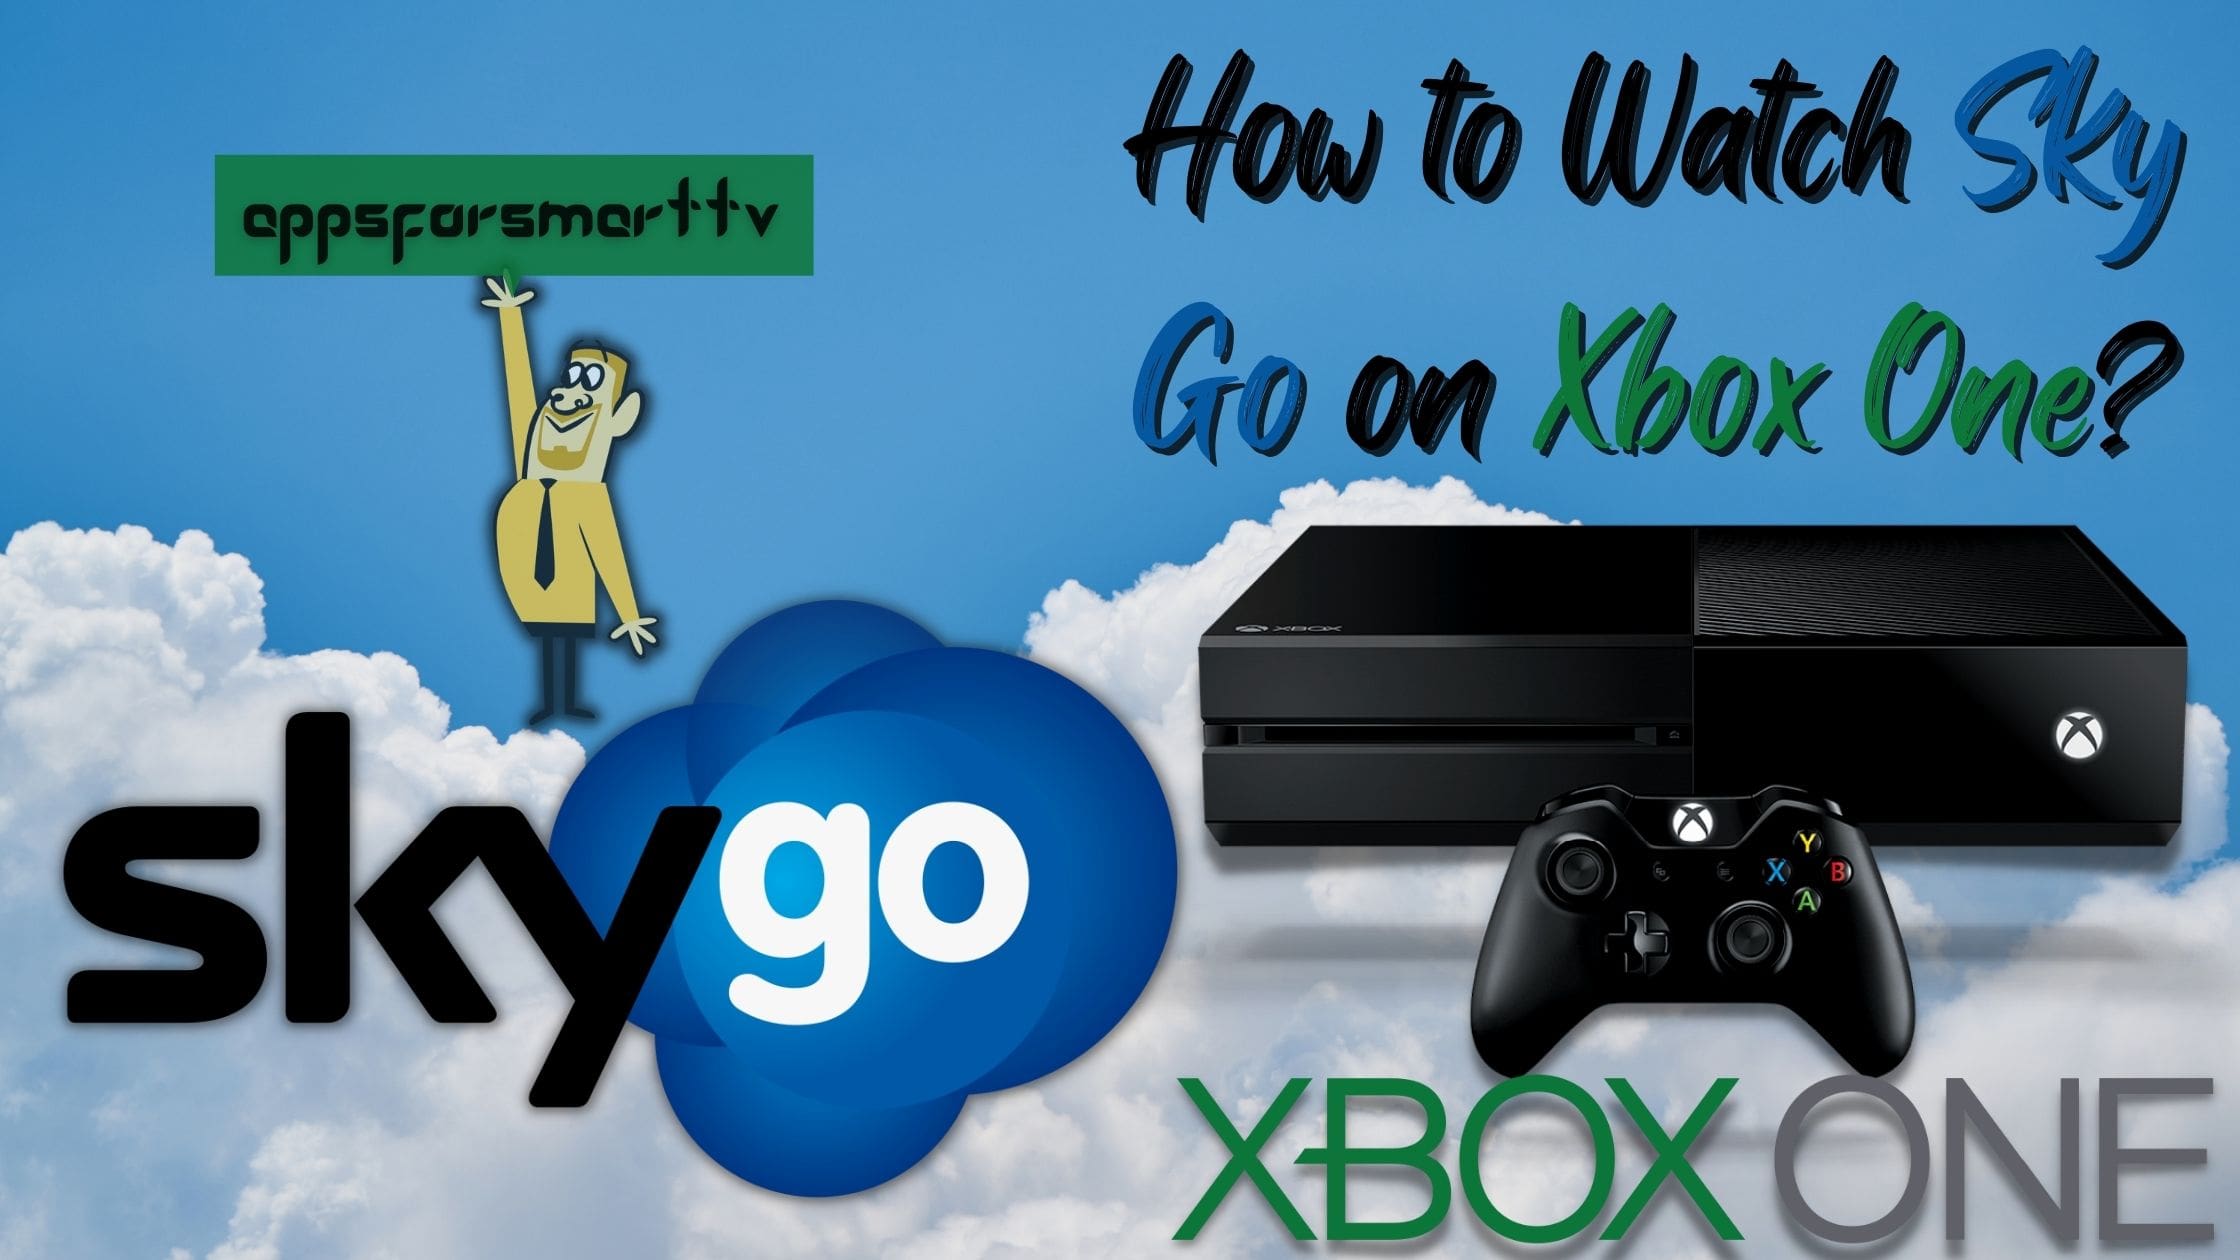 How to Install and Watch Sky Go on Xbox One